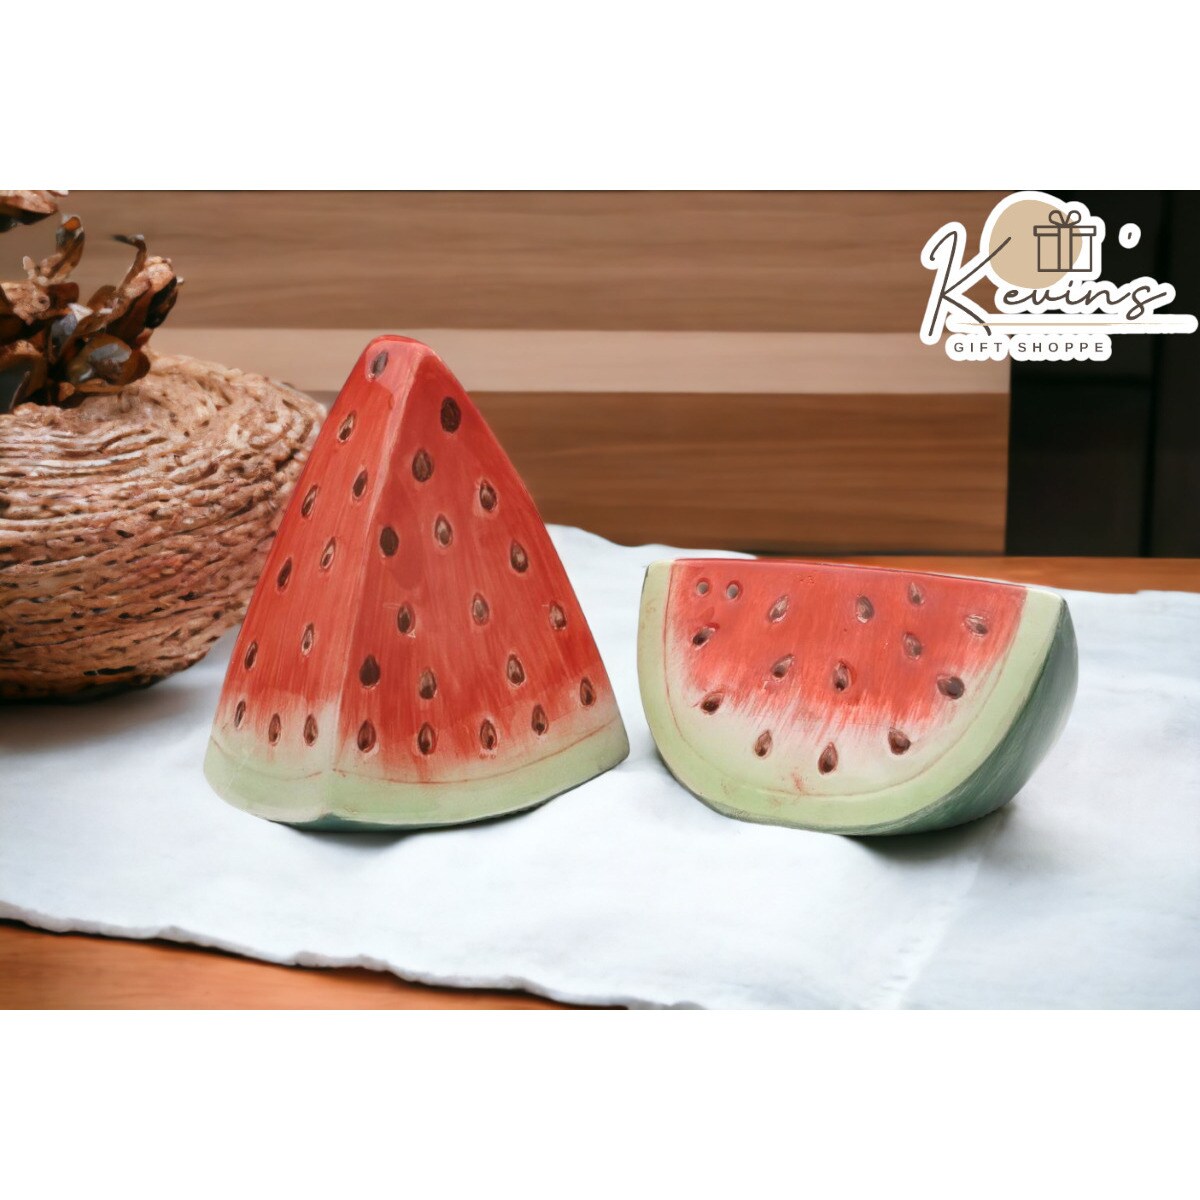 kevinsgiftshoppe Hand Painted Ceramic Watermelon Salt and Pepper Shakers Home Decor   Kitchen Decor